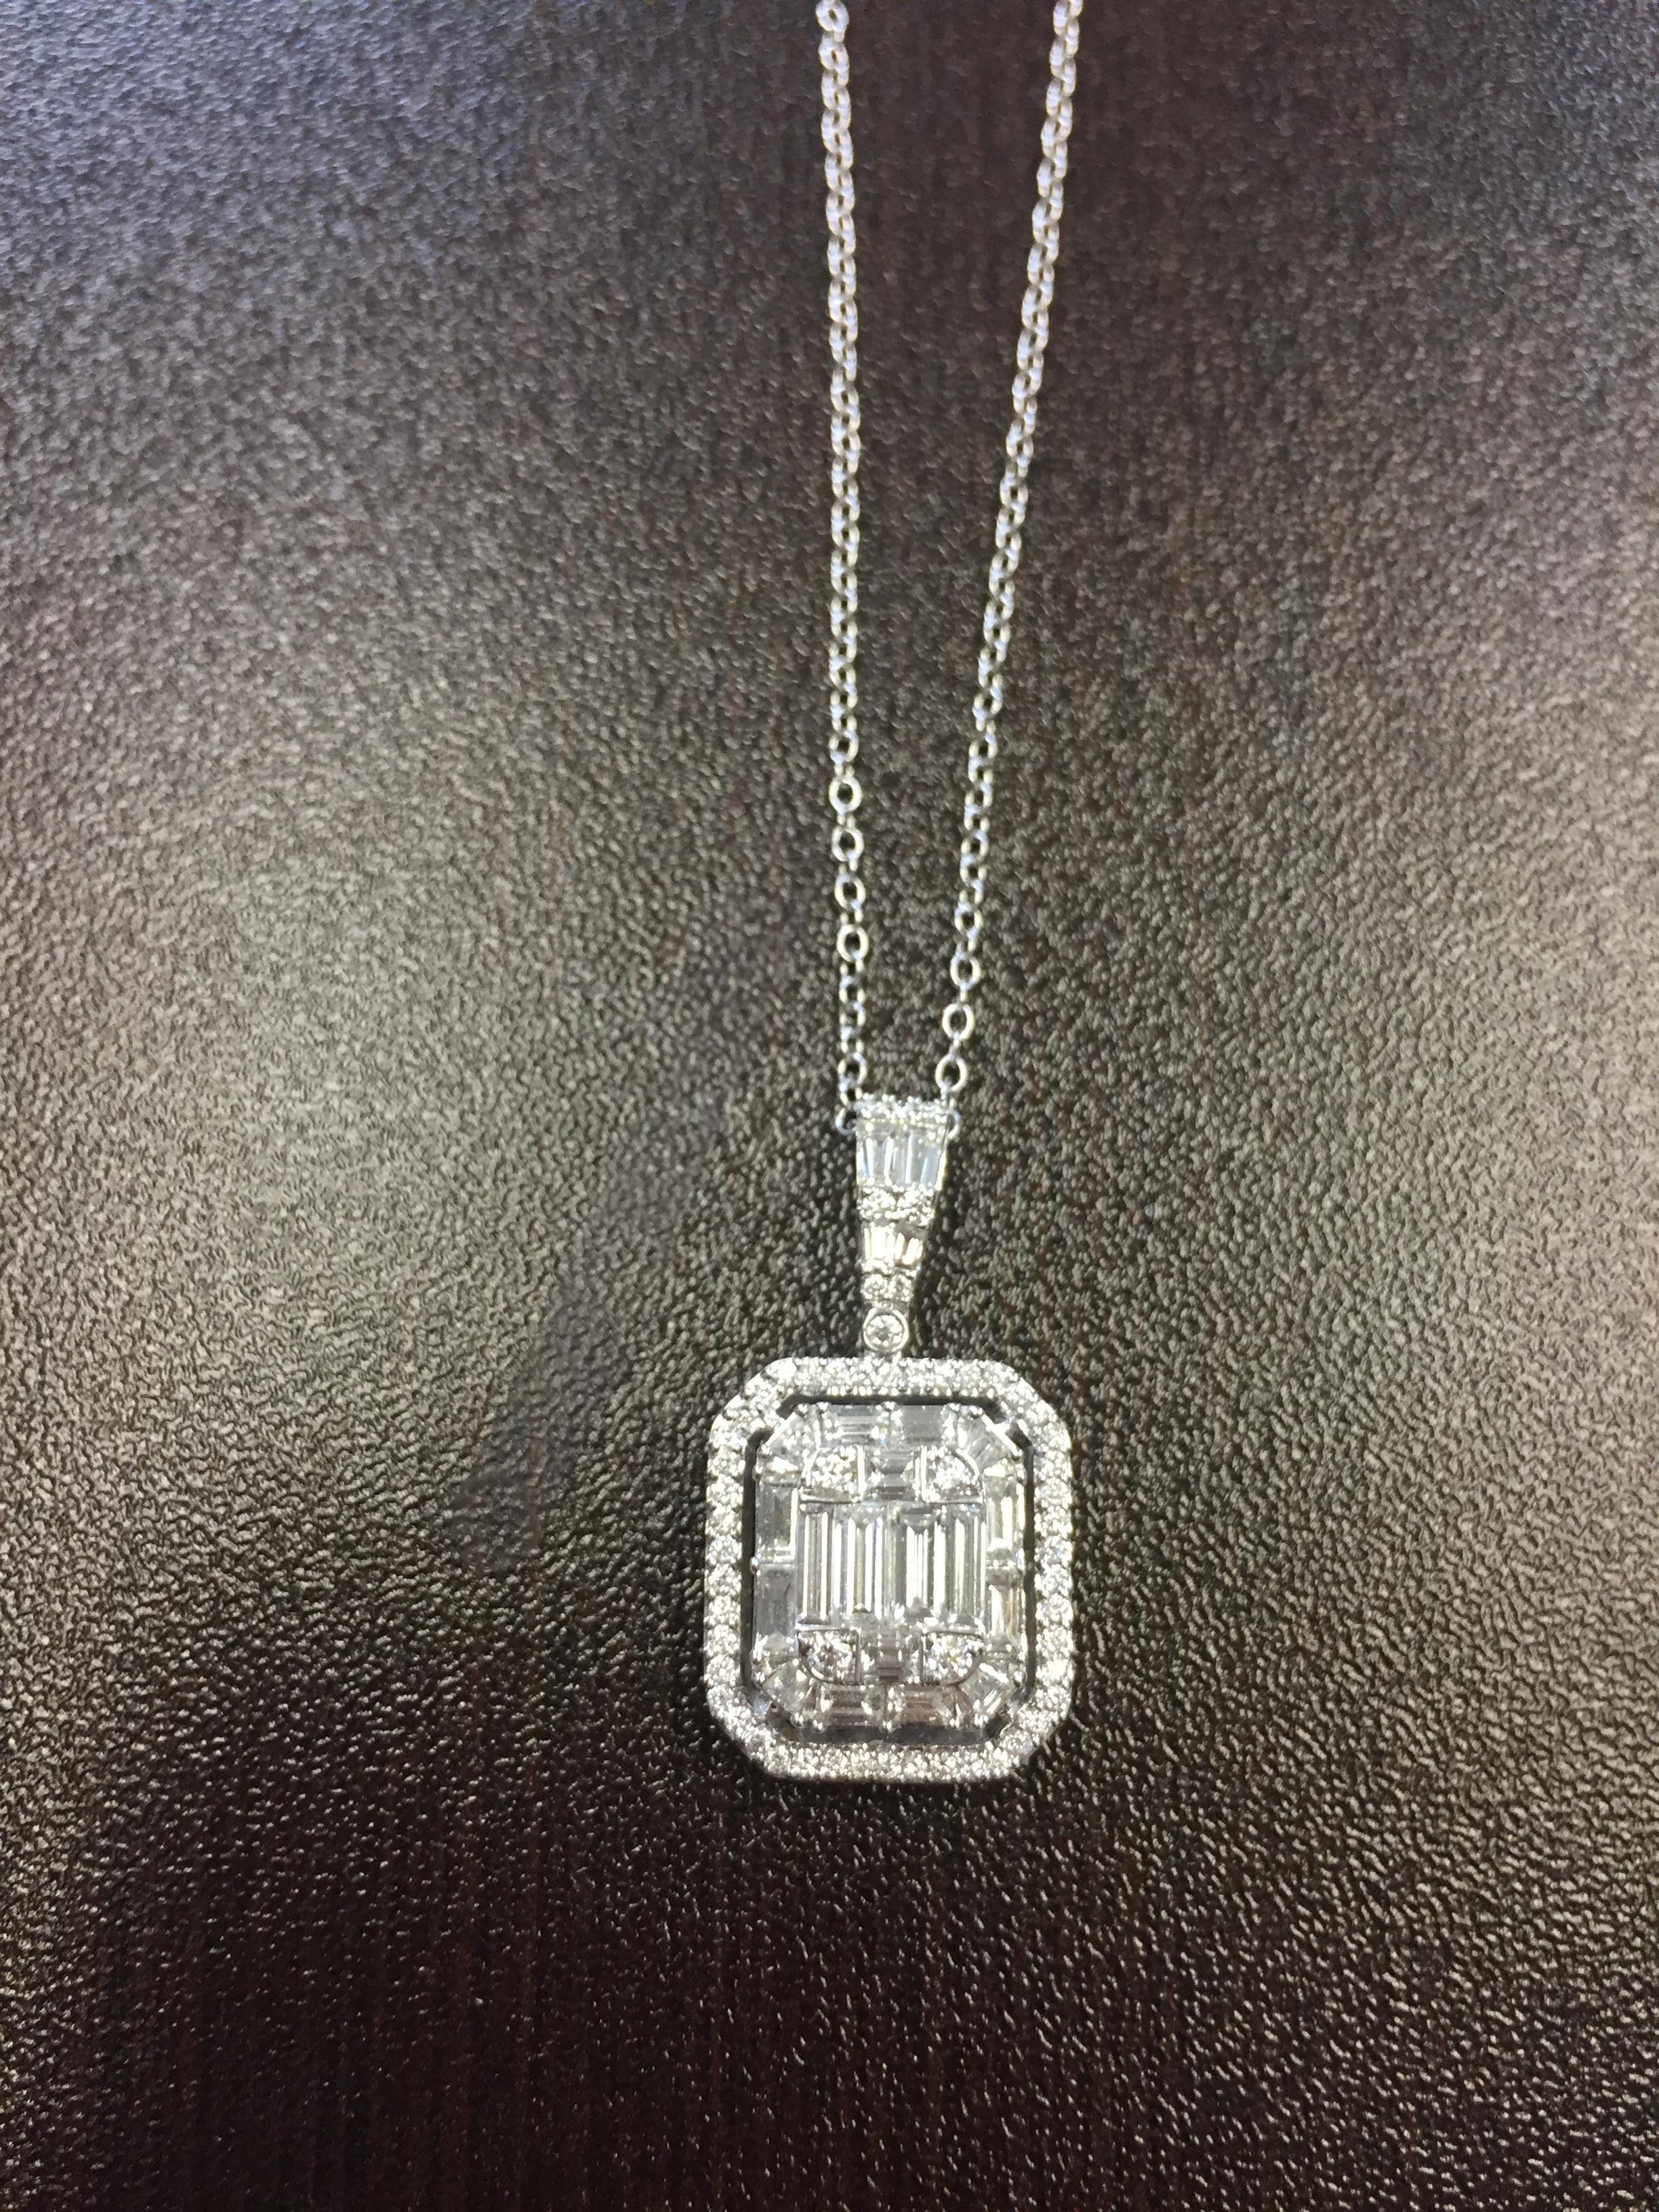 2 Carat Emerald Cut Diamond Pendant In New Condition For Sale In Great Neck, NY